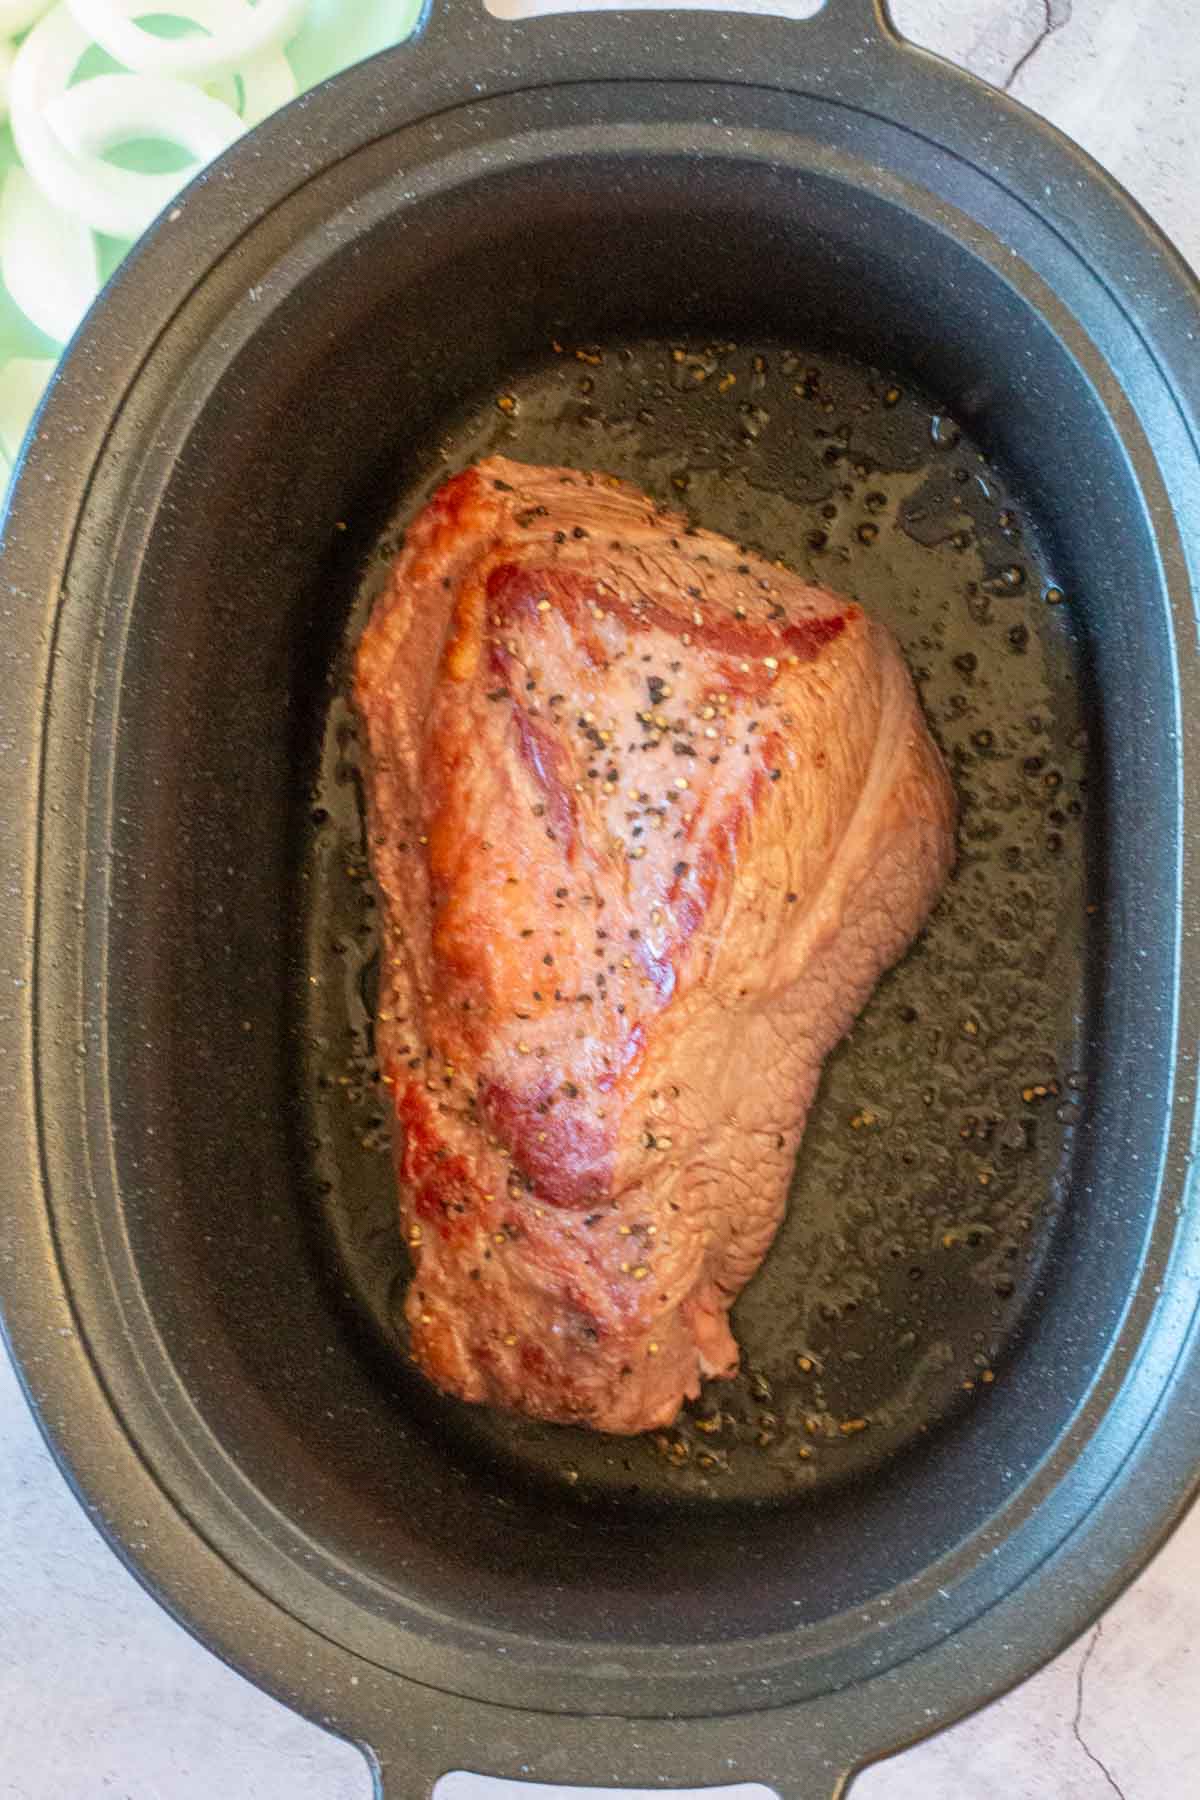 Searing a beef brisket to cook in a crockpot.